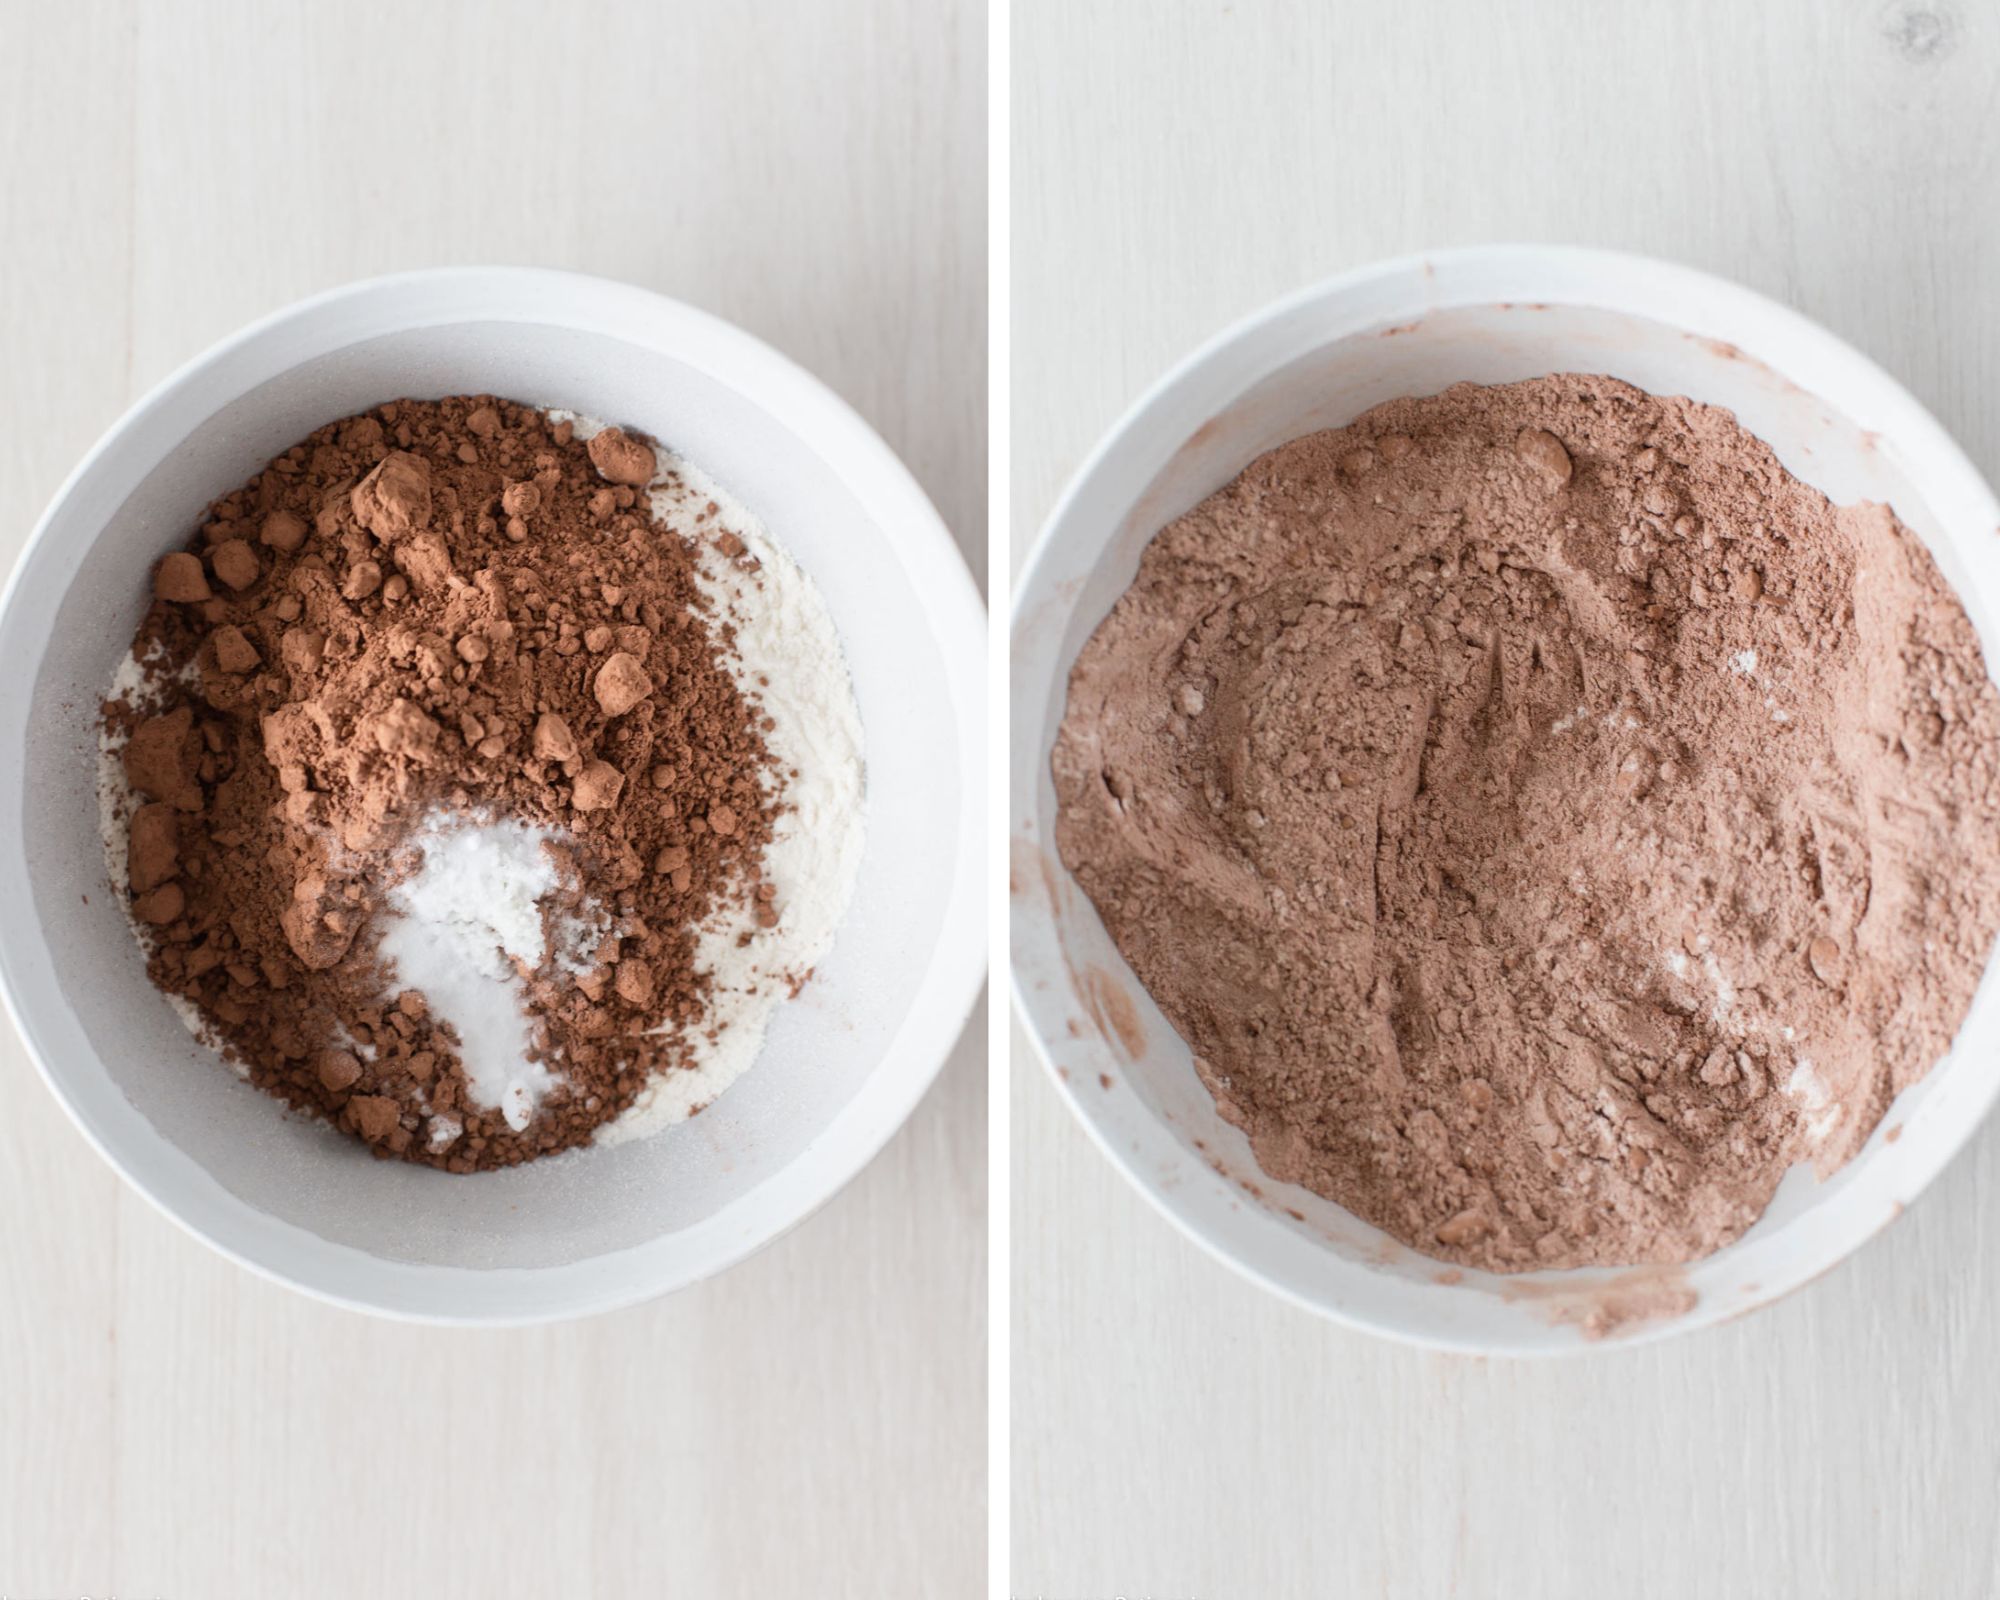 Mixing together the flour, cocoa powder, baking soda and salt in a small mixing bowl.